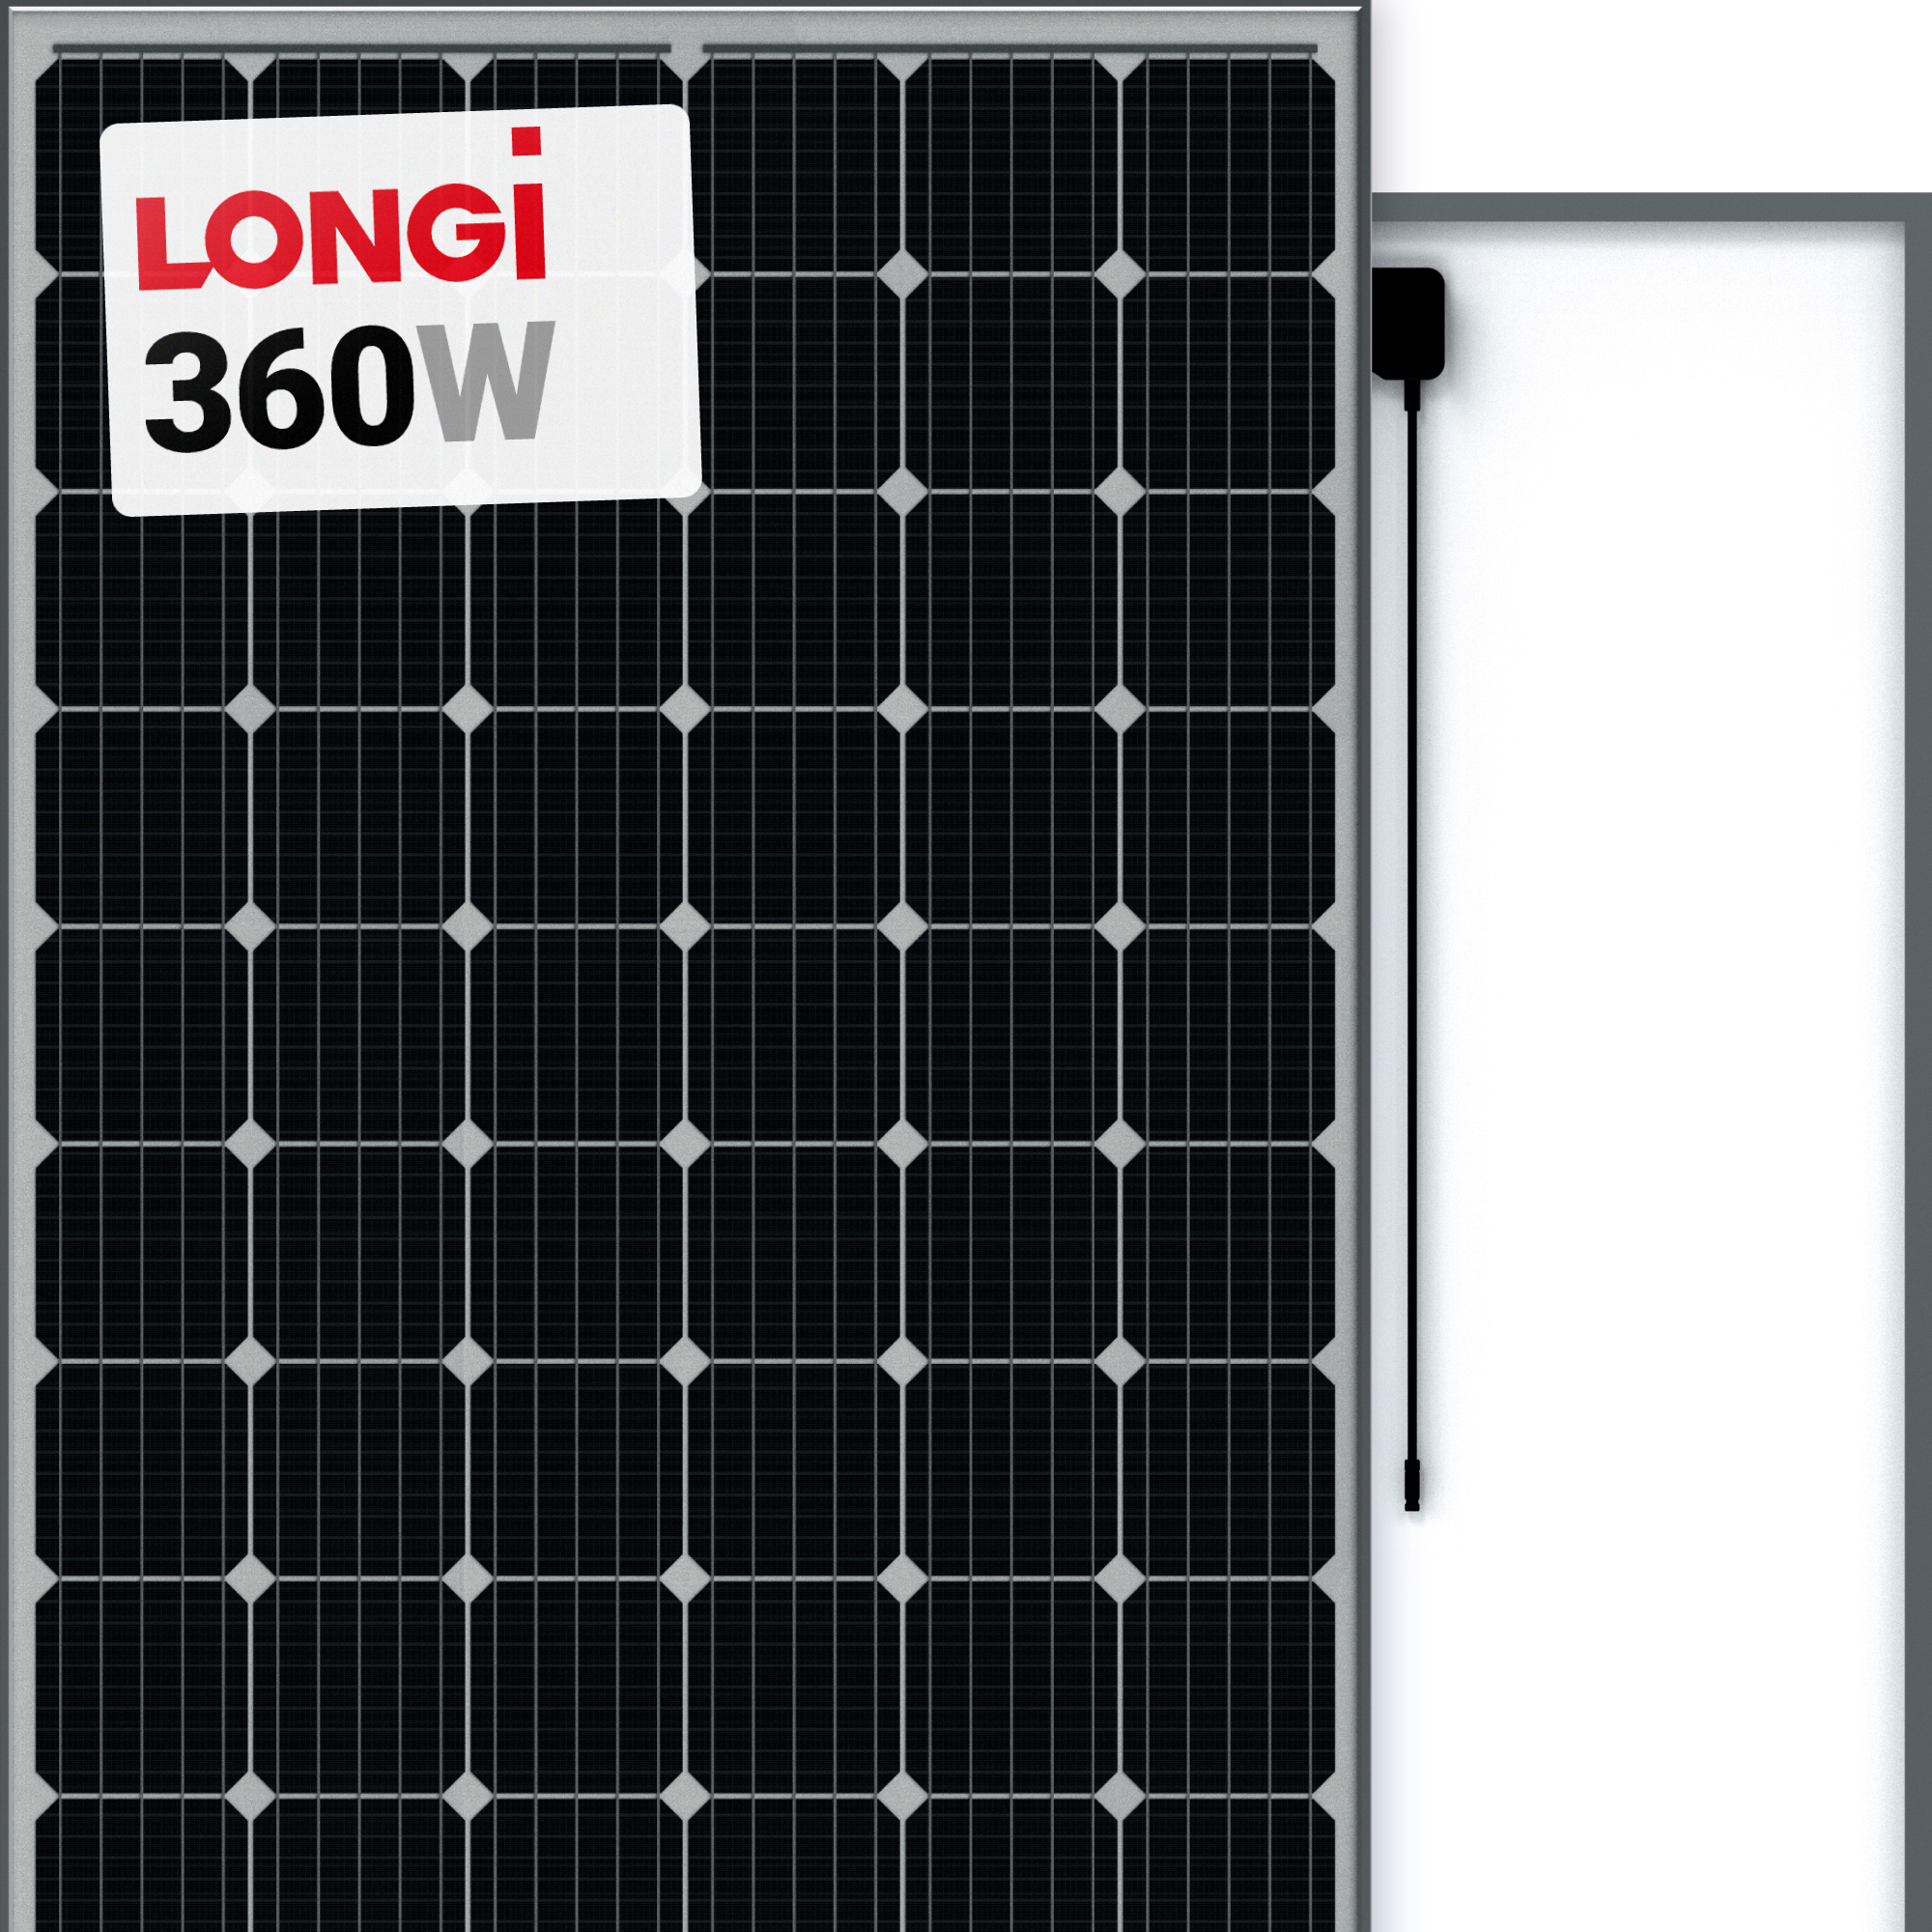 LONGi LR672PH 360W Solar Panel is available online at a low price at A1 Solar Store